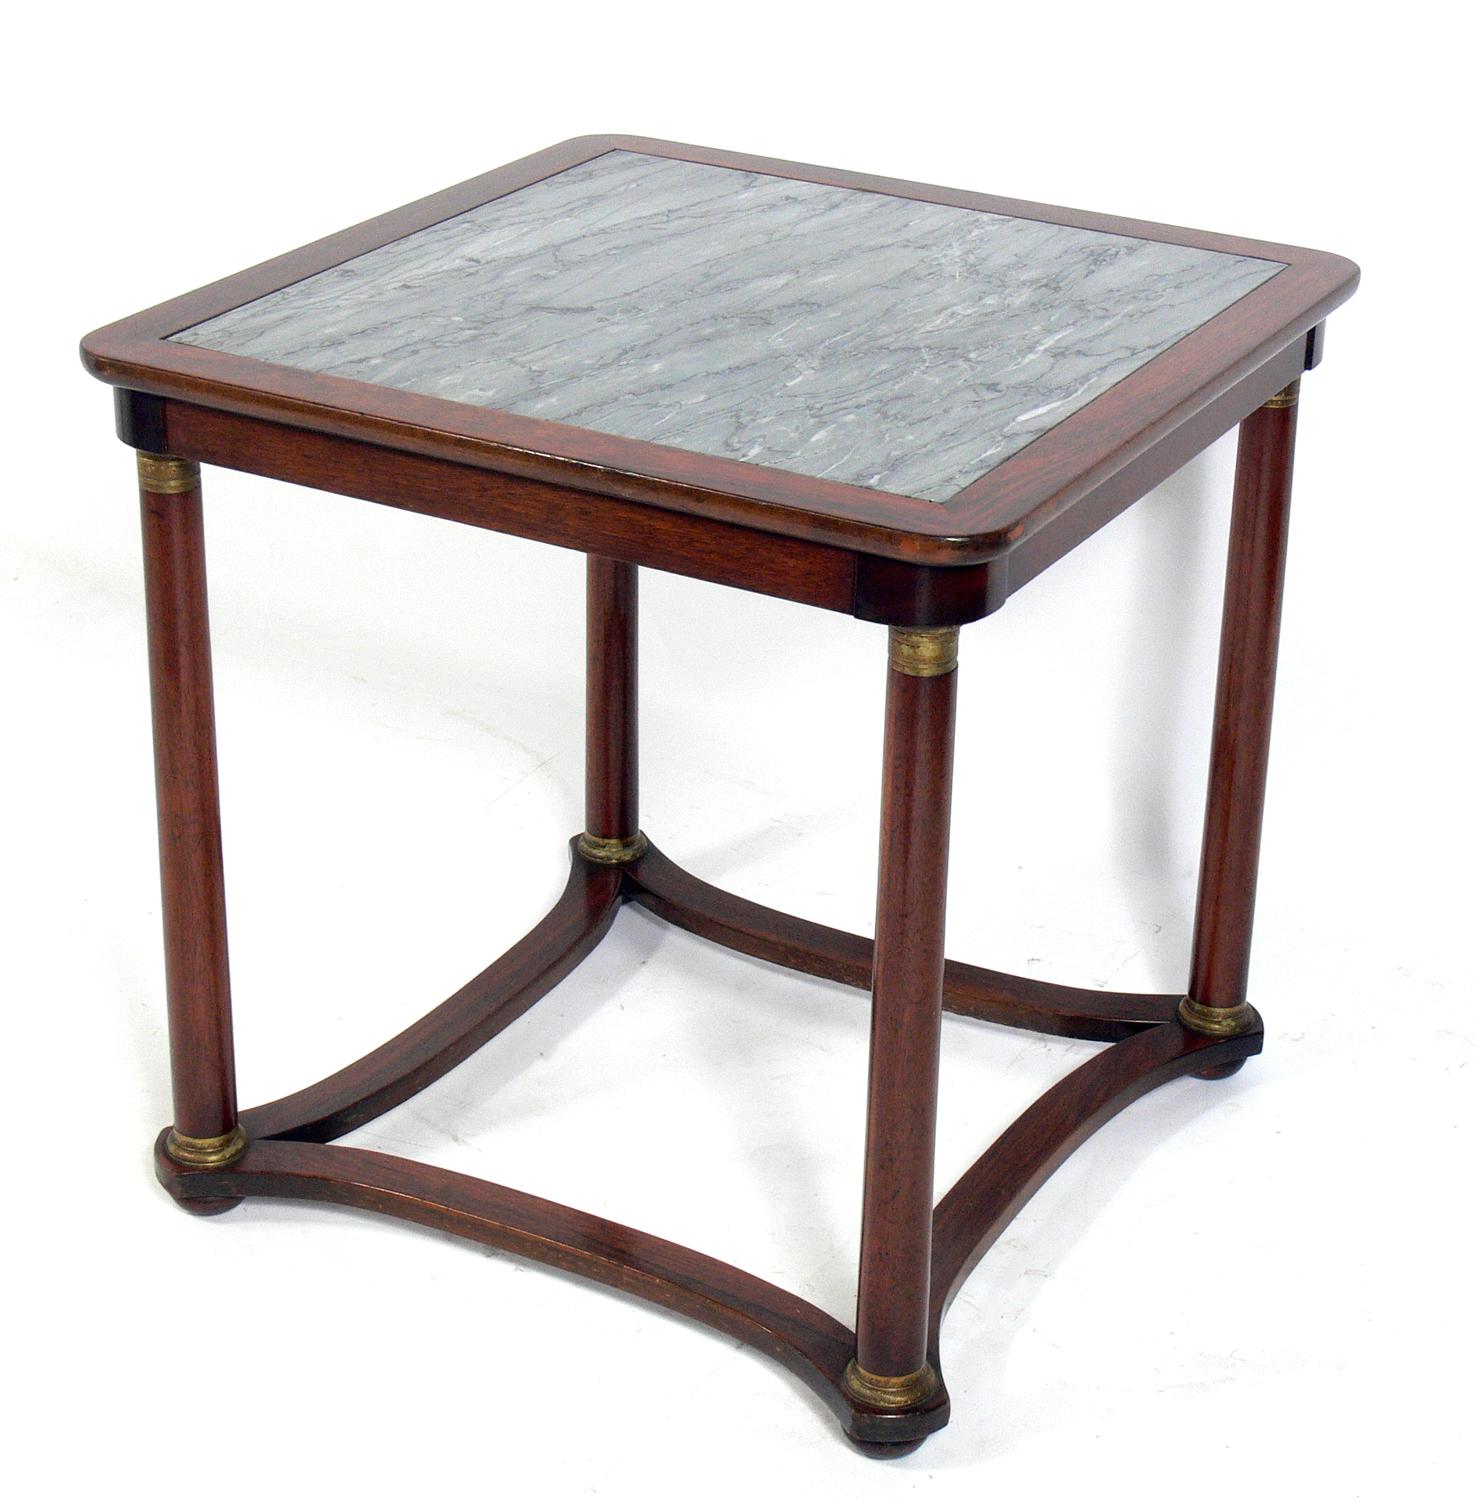 Neoclassical rosewood and marble table, probably French, circa 1940s, possibly earlier. It is constructed of rosewood and other woods with brass or bronze mounts and an Italian gray marble-top with beautiful veining.